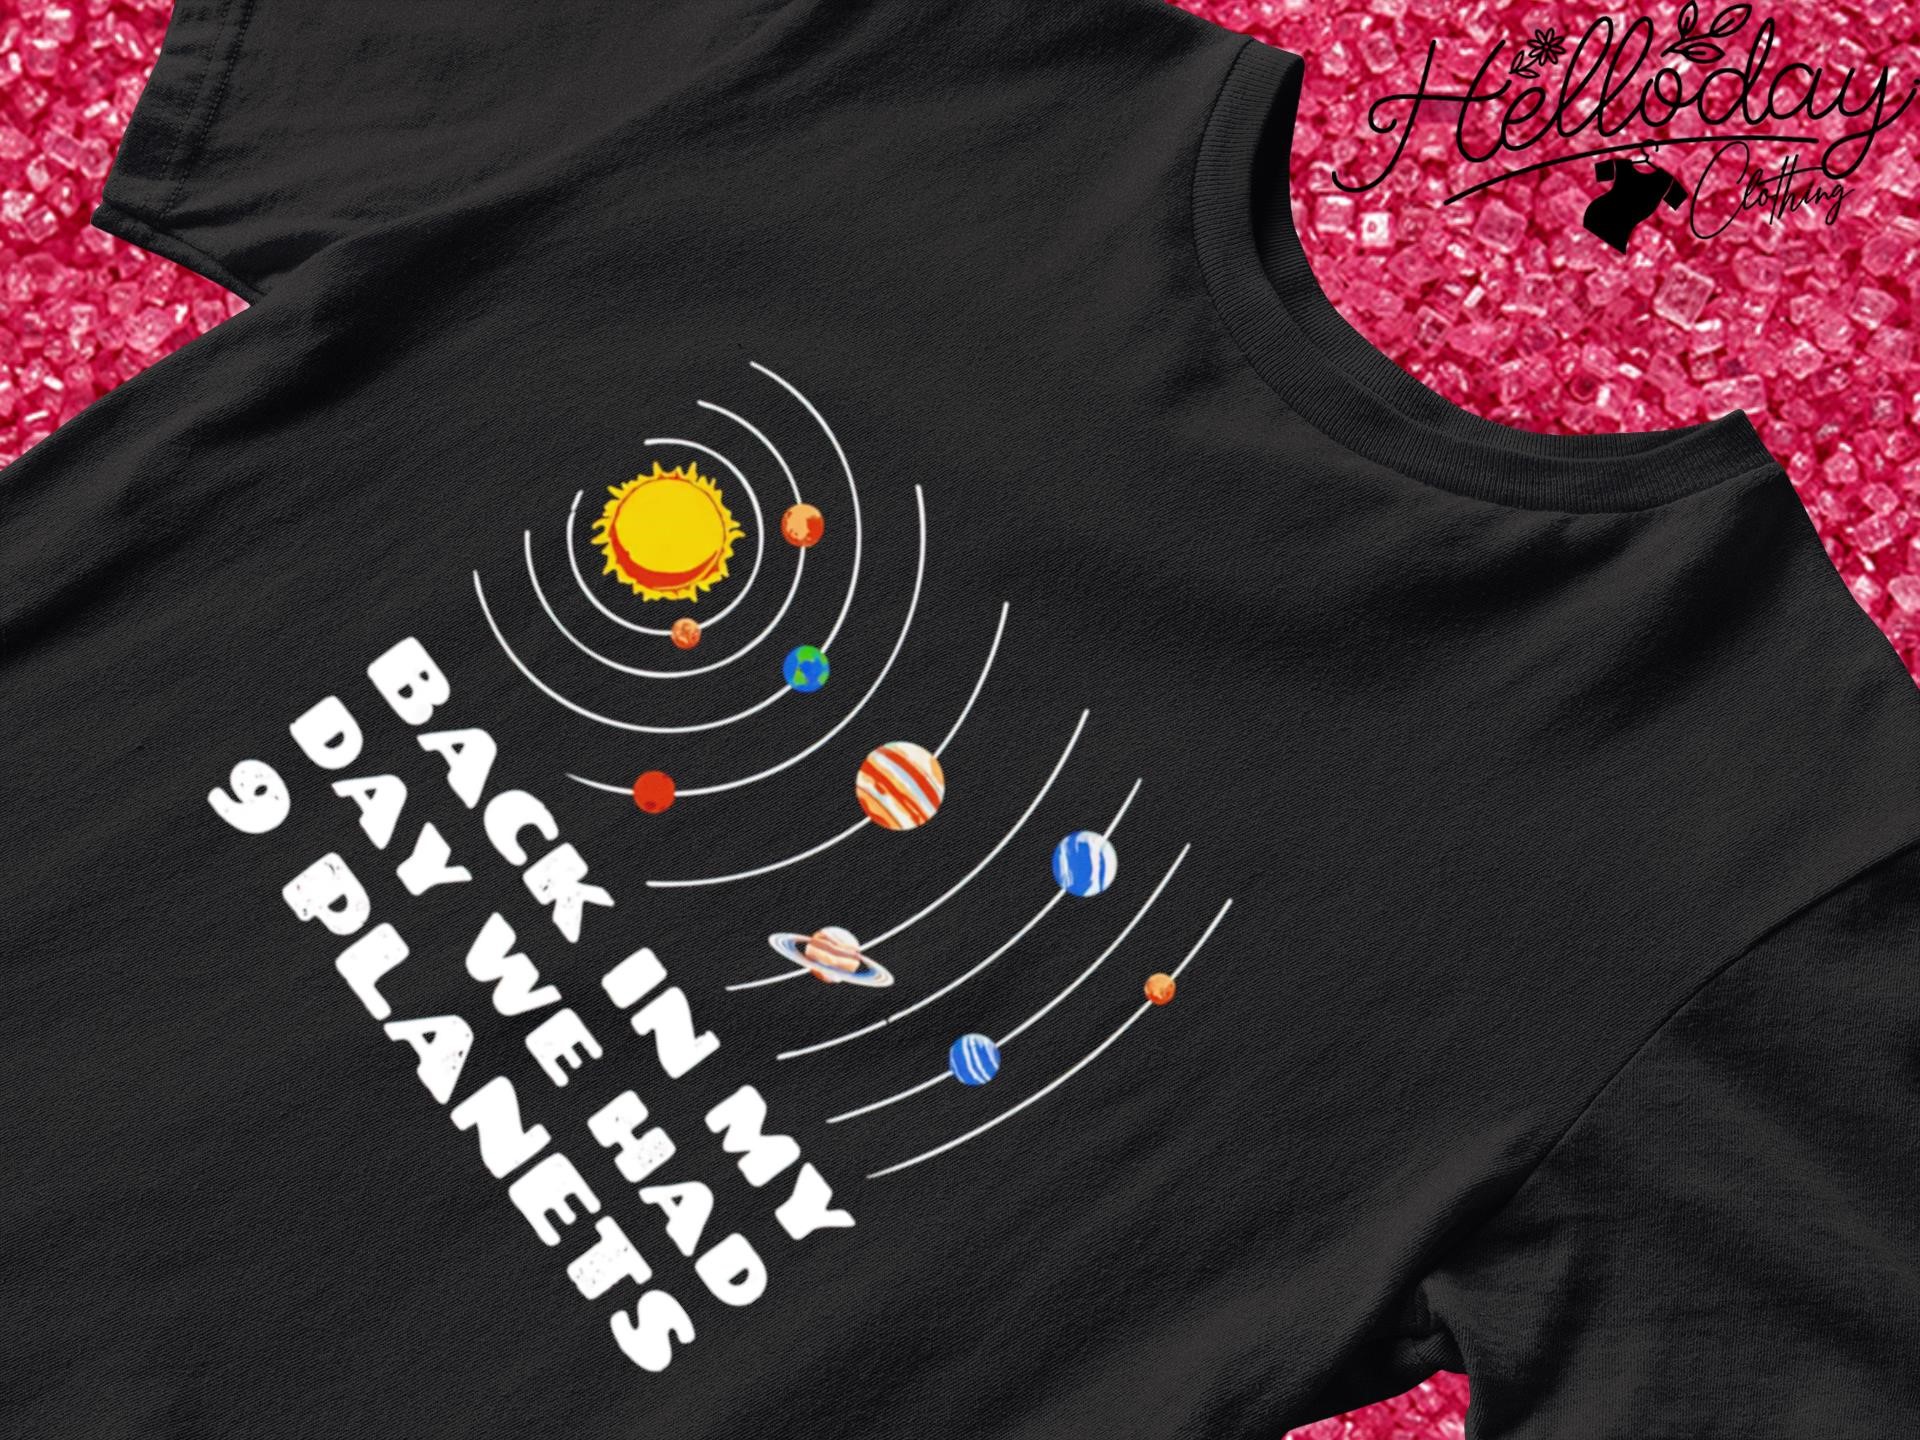 Back in my day we had 9 planets T-shirt